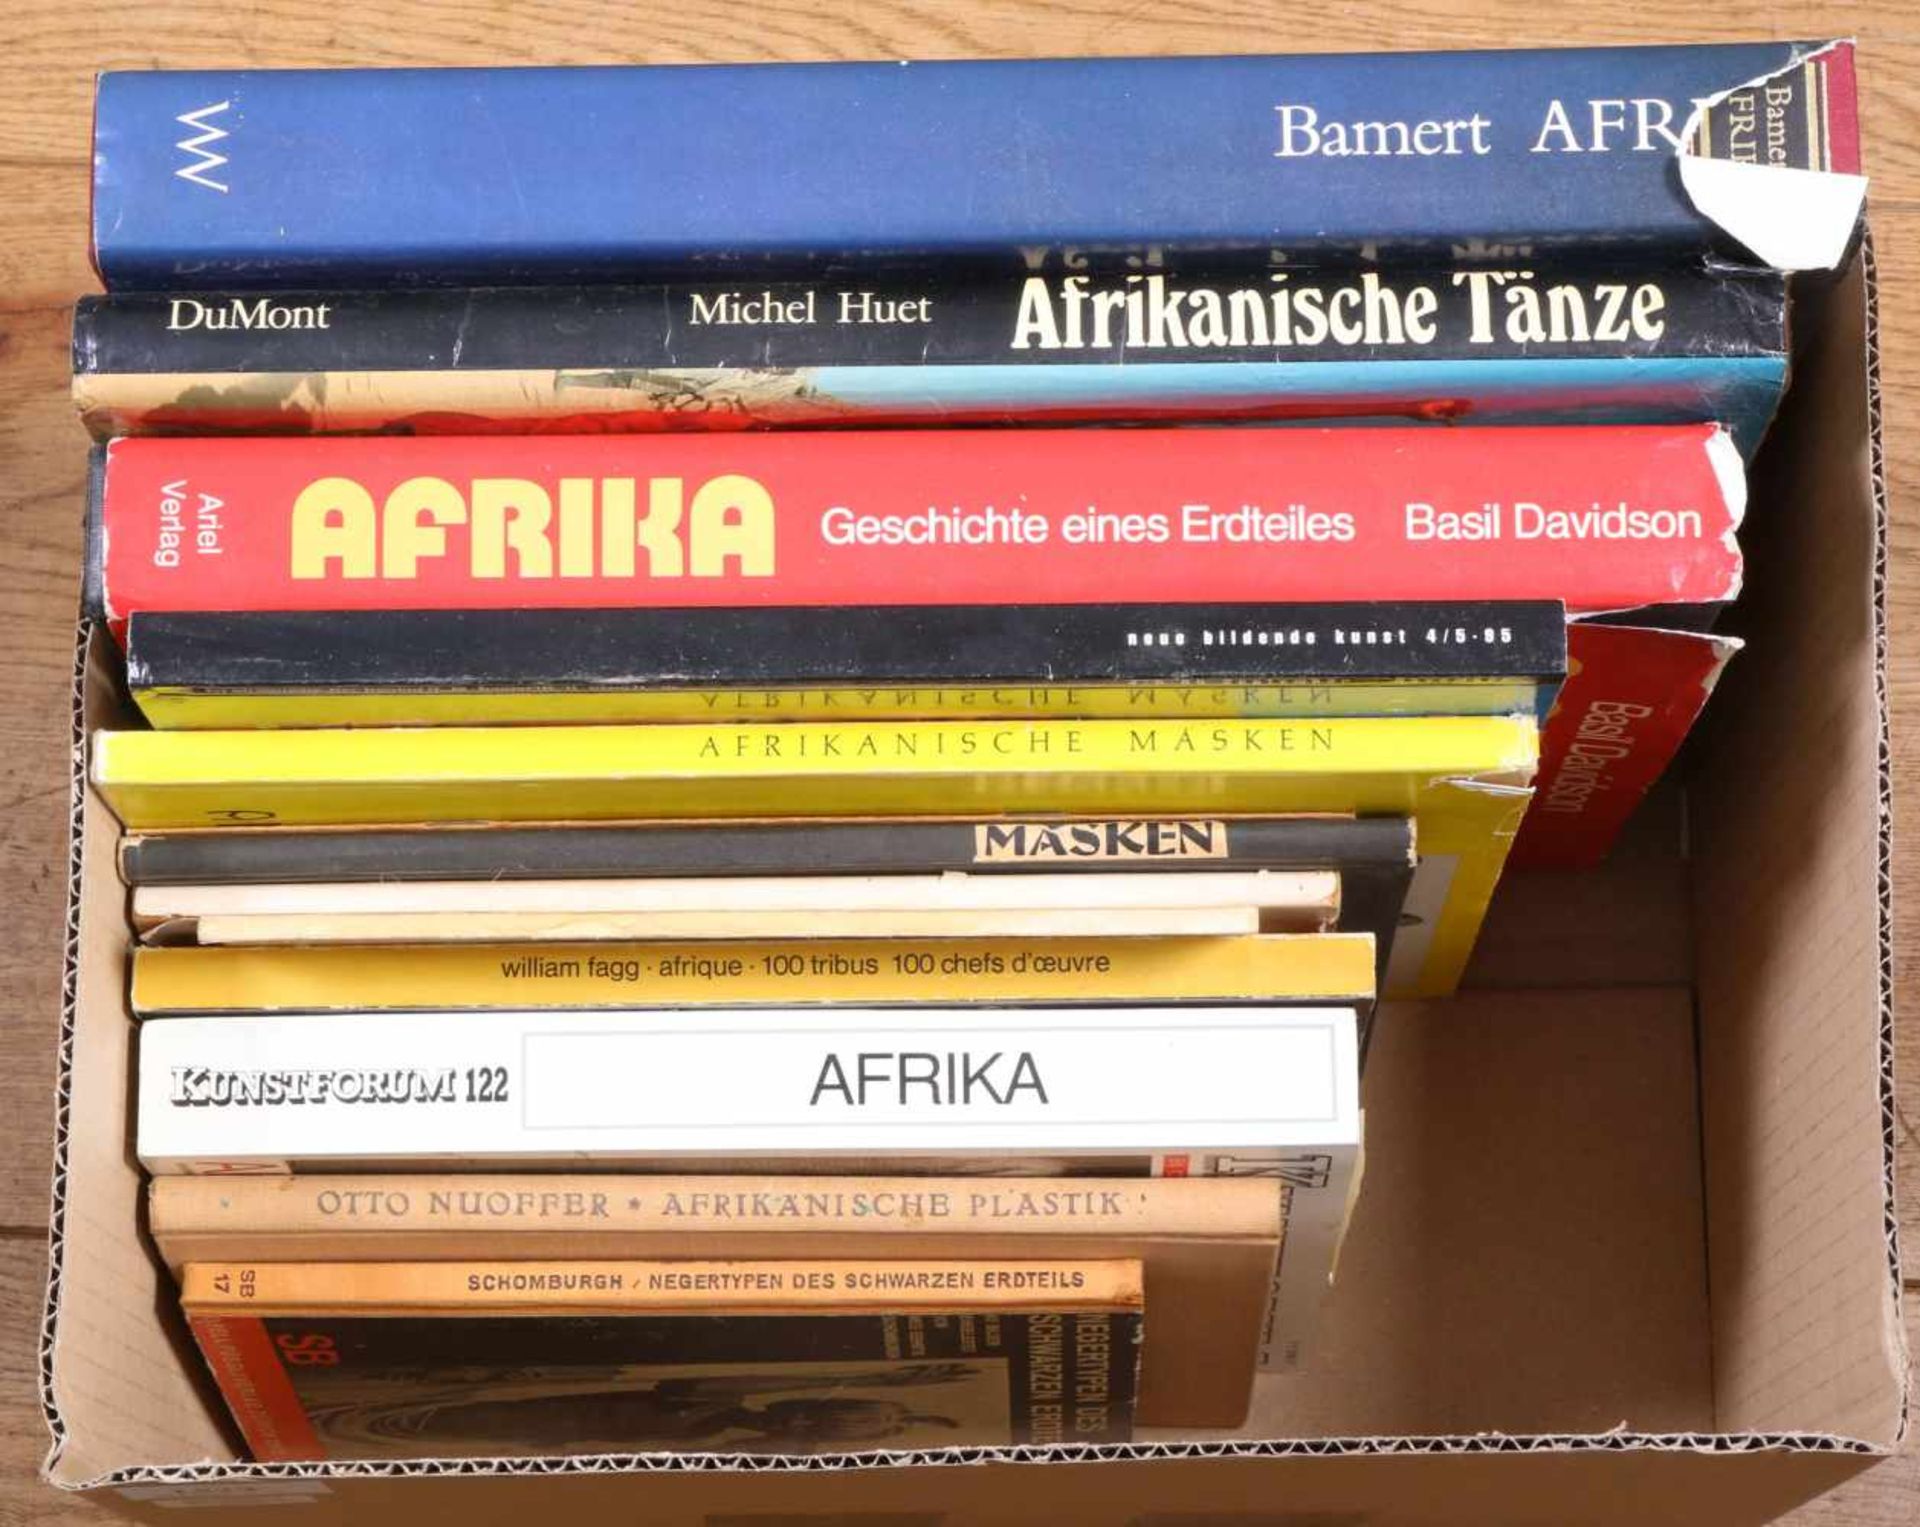 Several books concerning African art, [ds]0